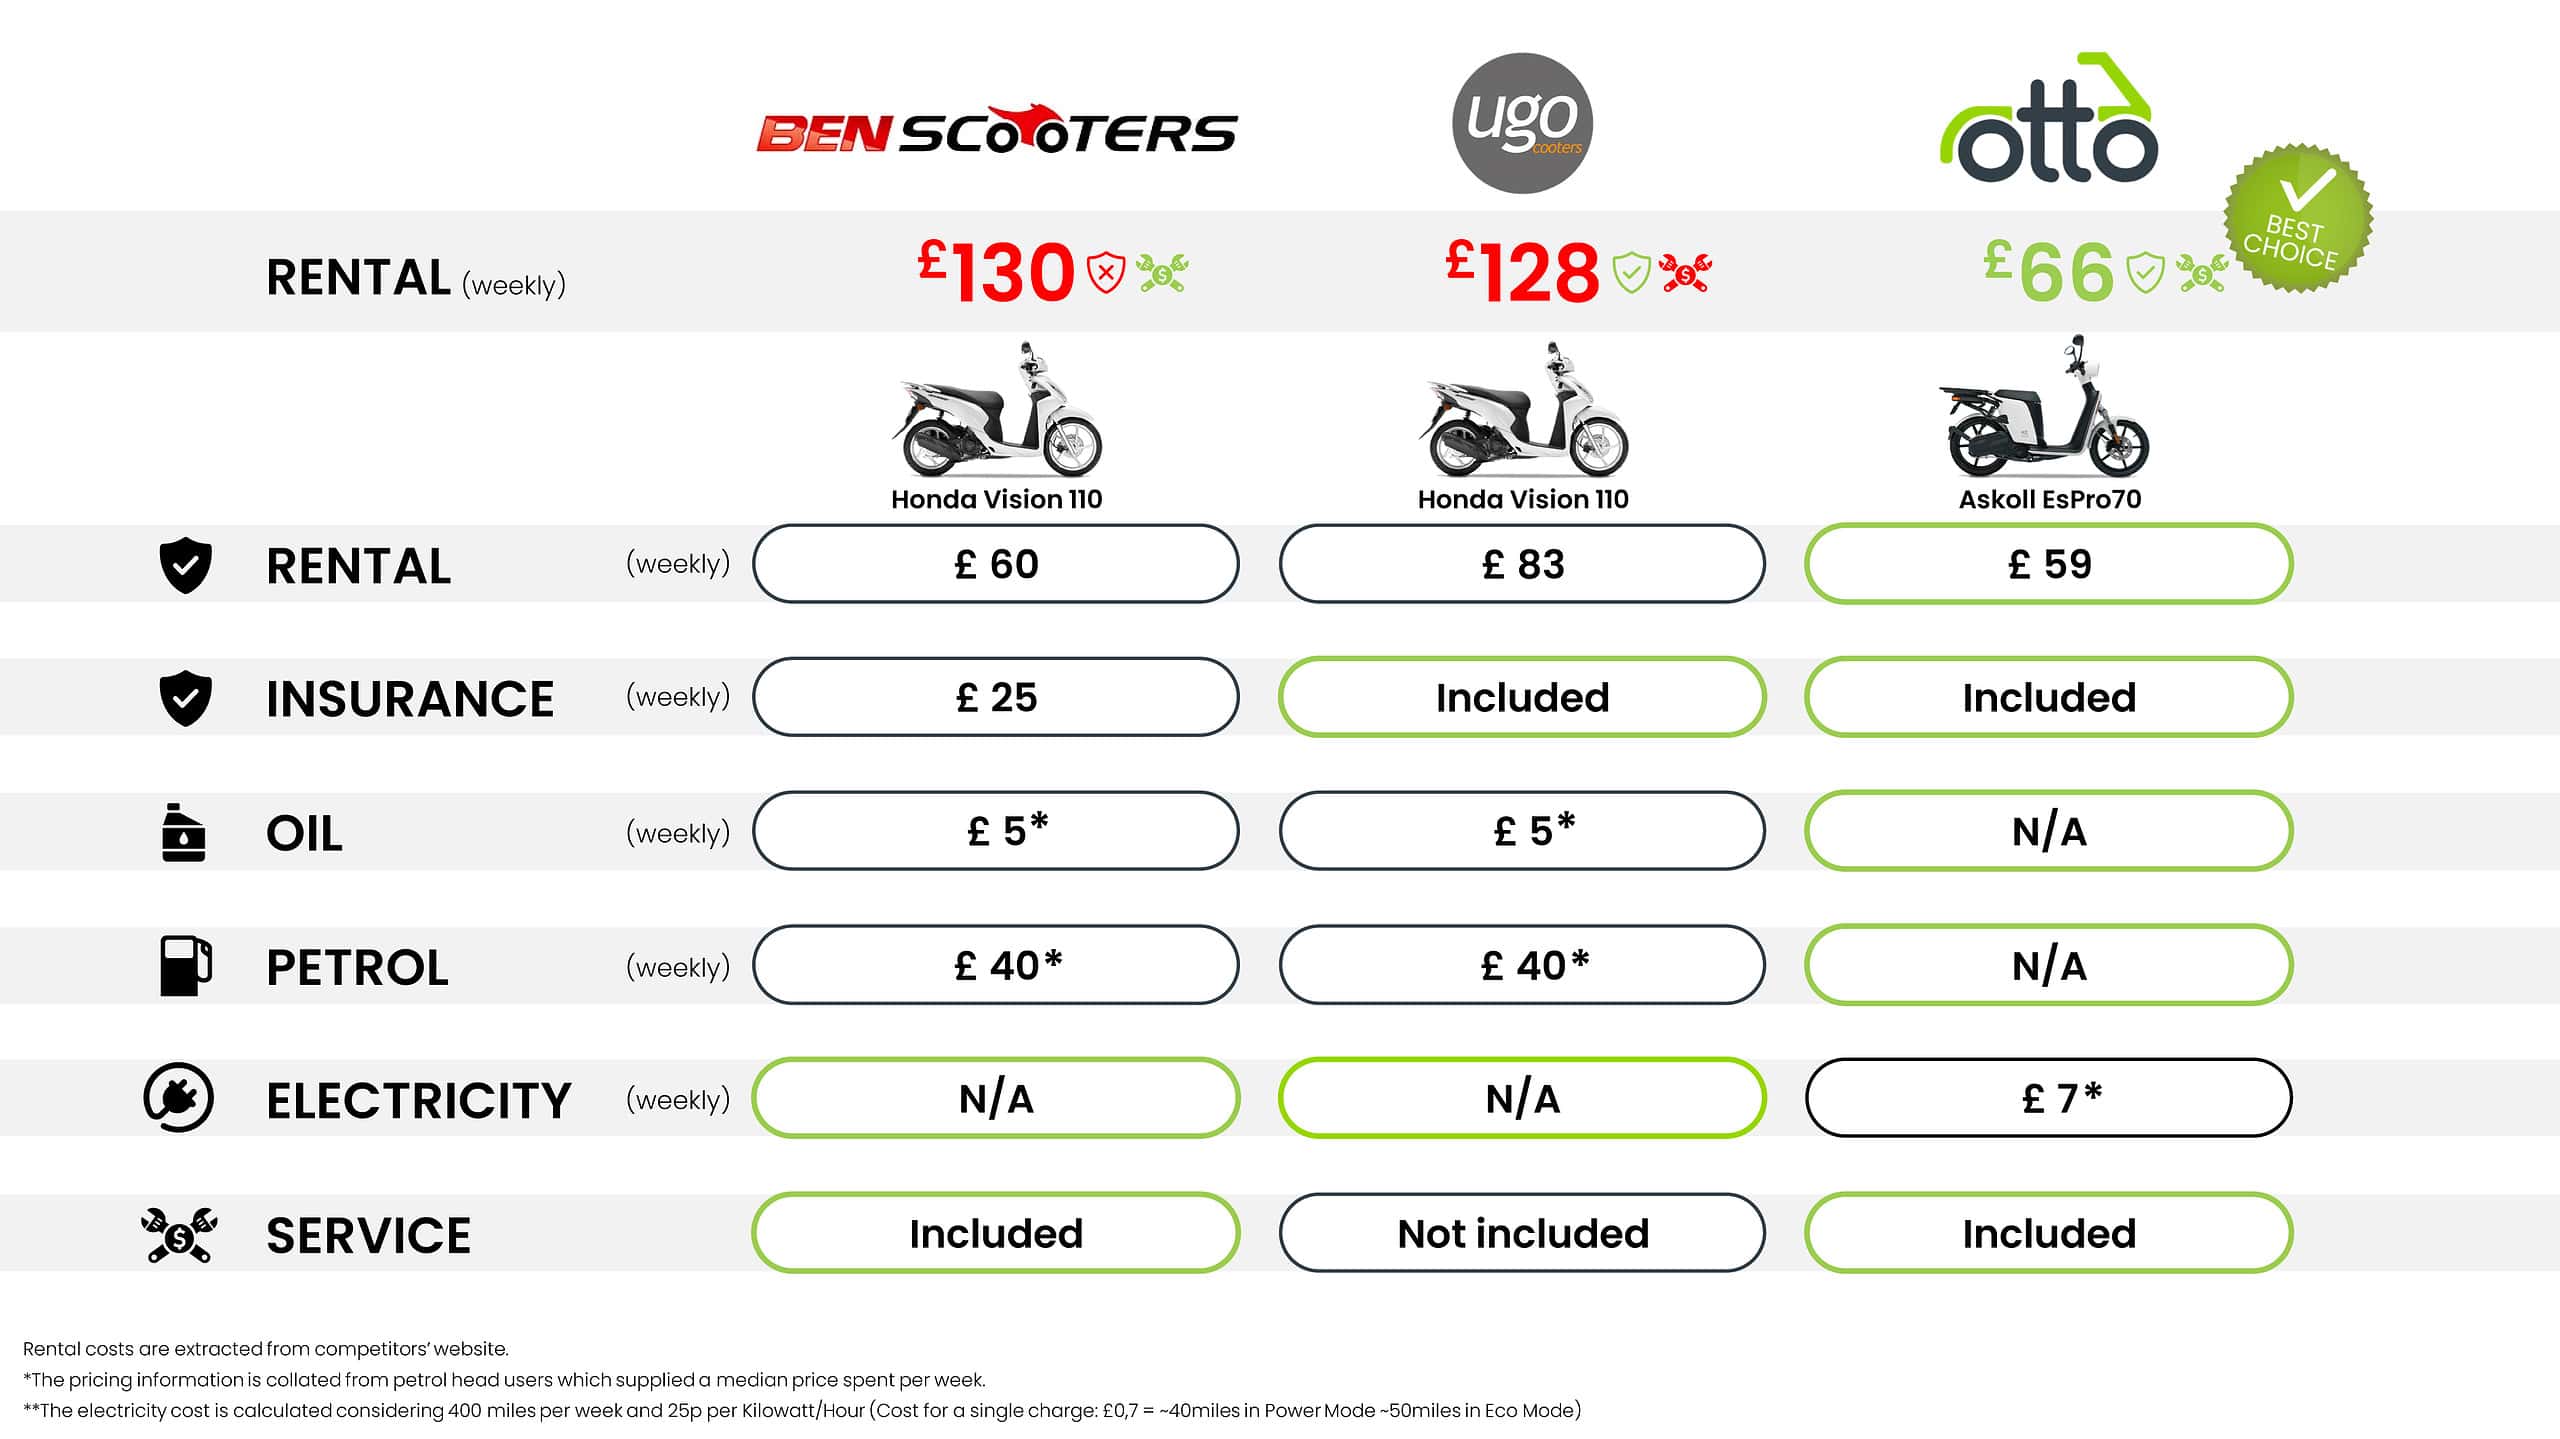 price comparison chart, Otto Scooter best delivery moped provider